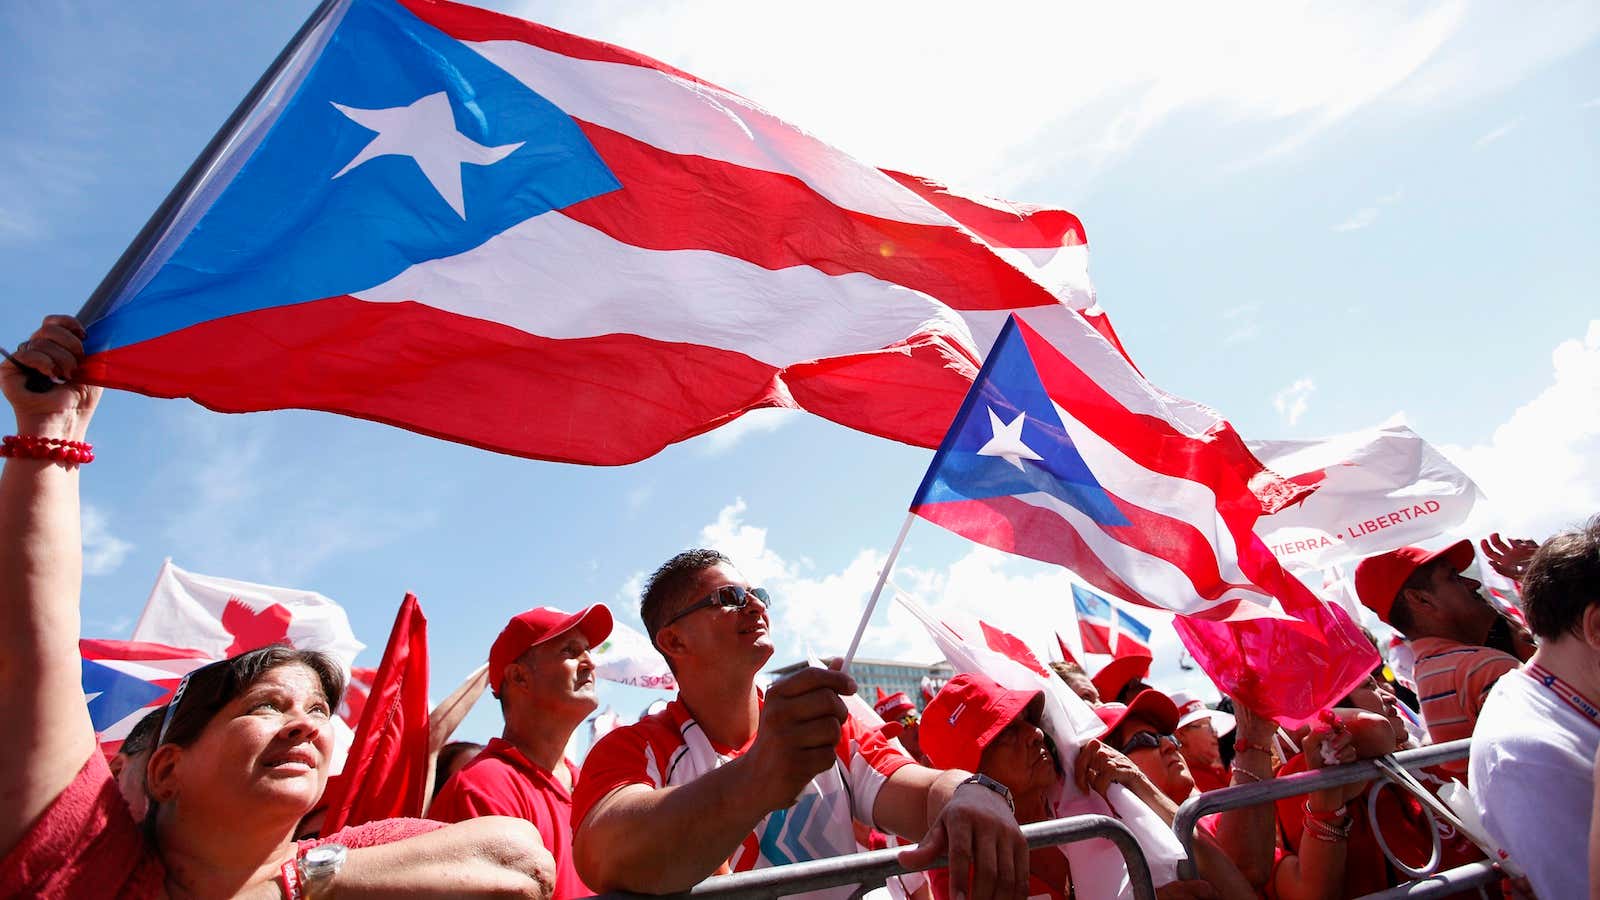 Puerto Ricans rally before a 2012 political status referendum.